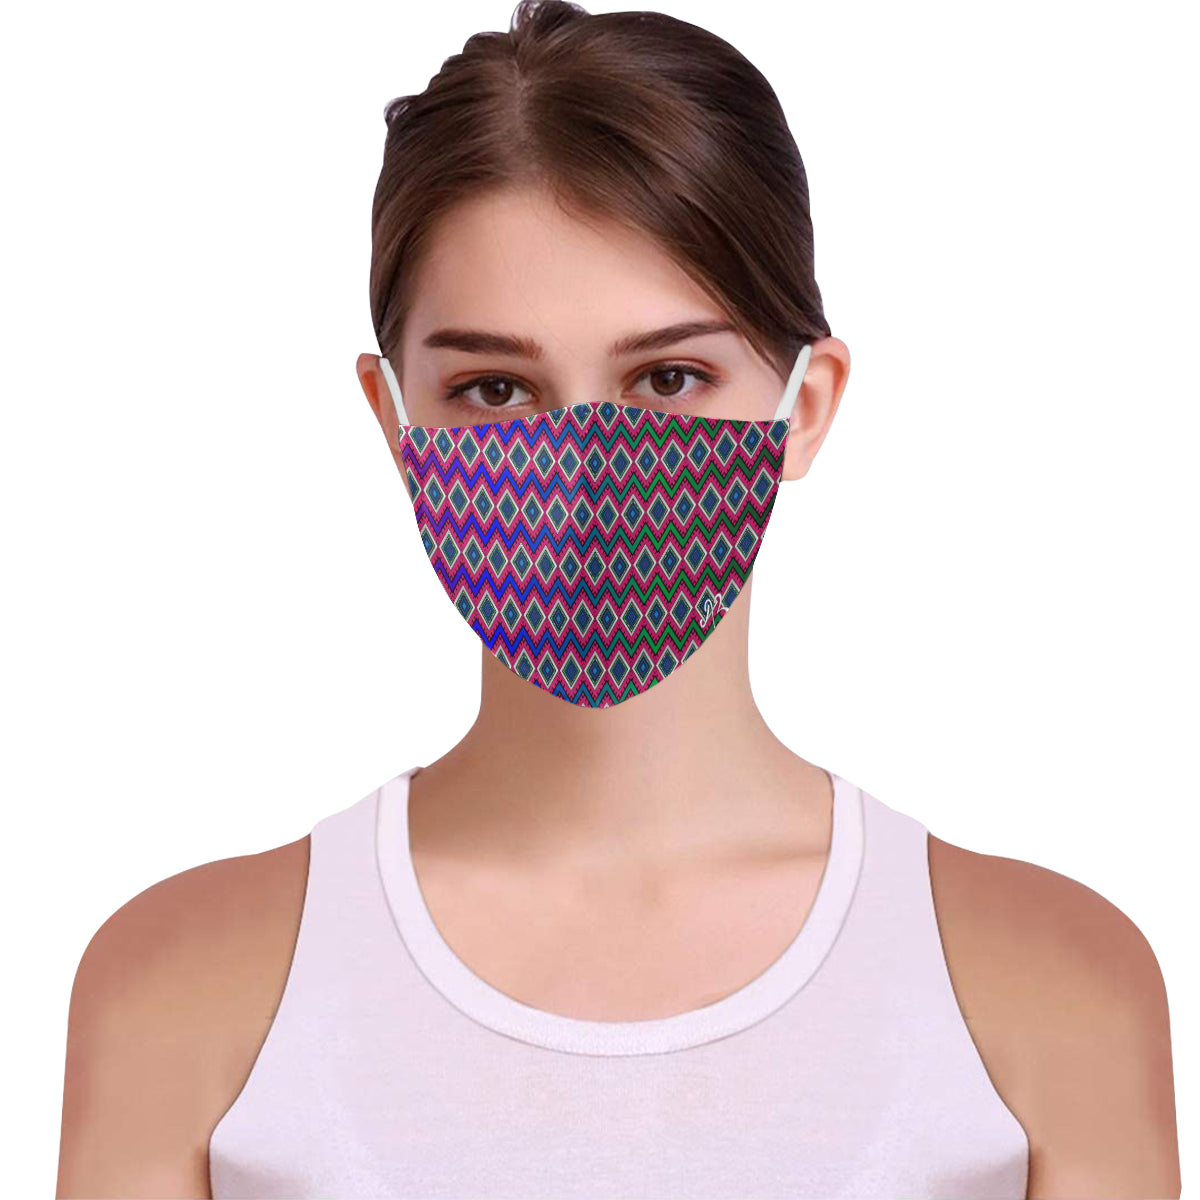 Quadrangle Print Cotton Fabric Face Mask with Filter Slot & Adjustable Strap (Pack of 5) - Non-medical use